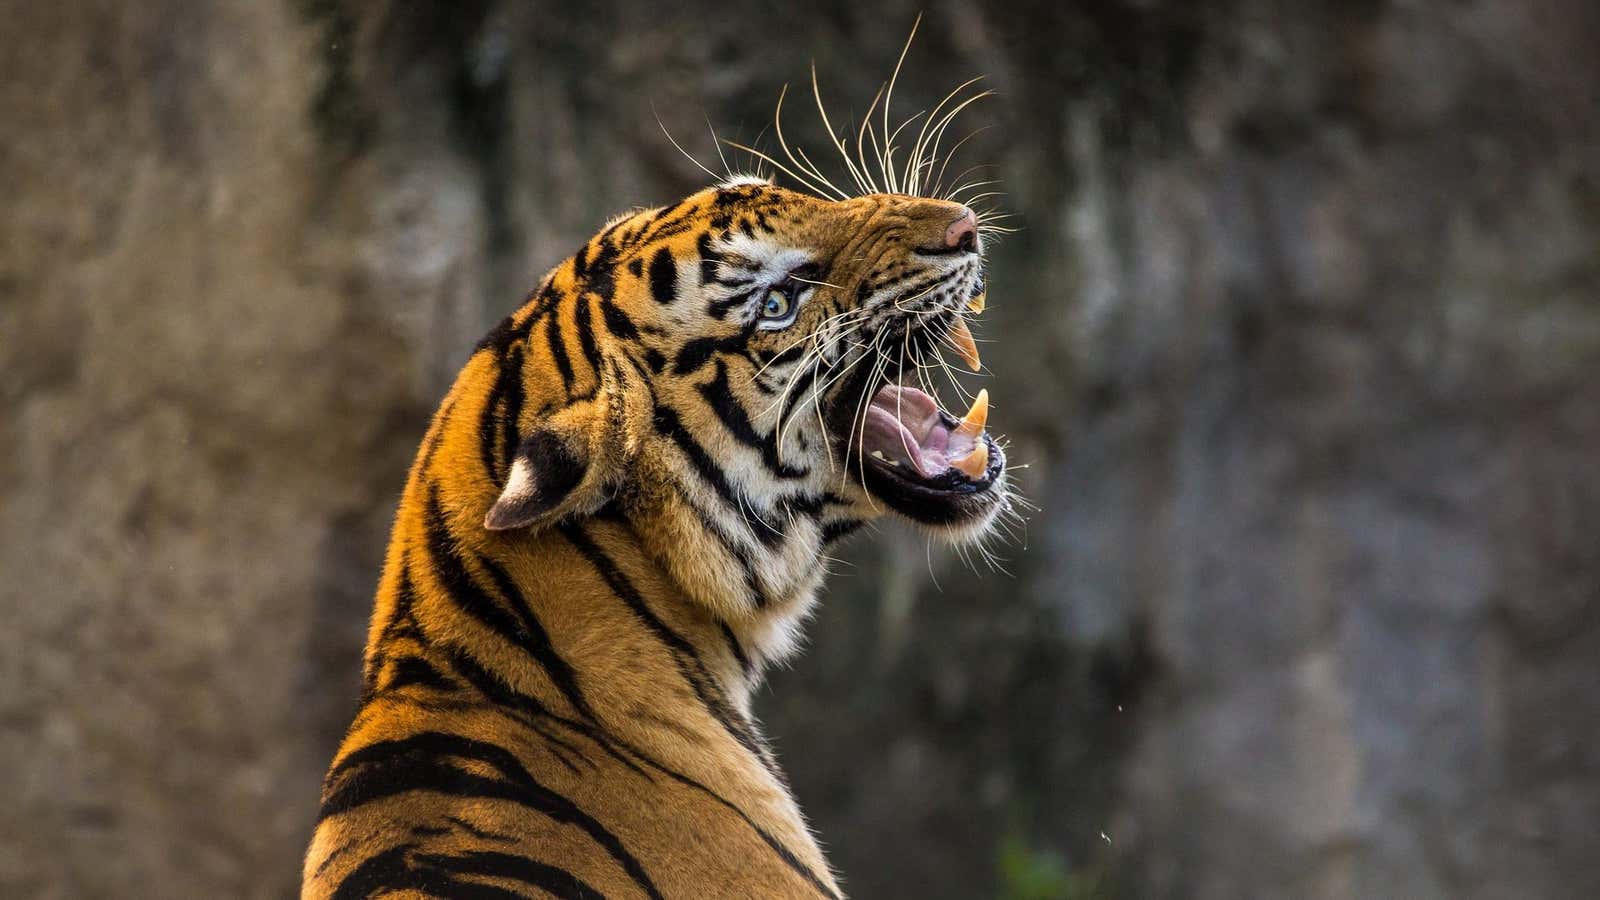 “The removal of at least 15 tigers may have been avoided if these villages had been prioritized earlier.”